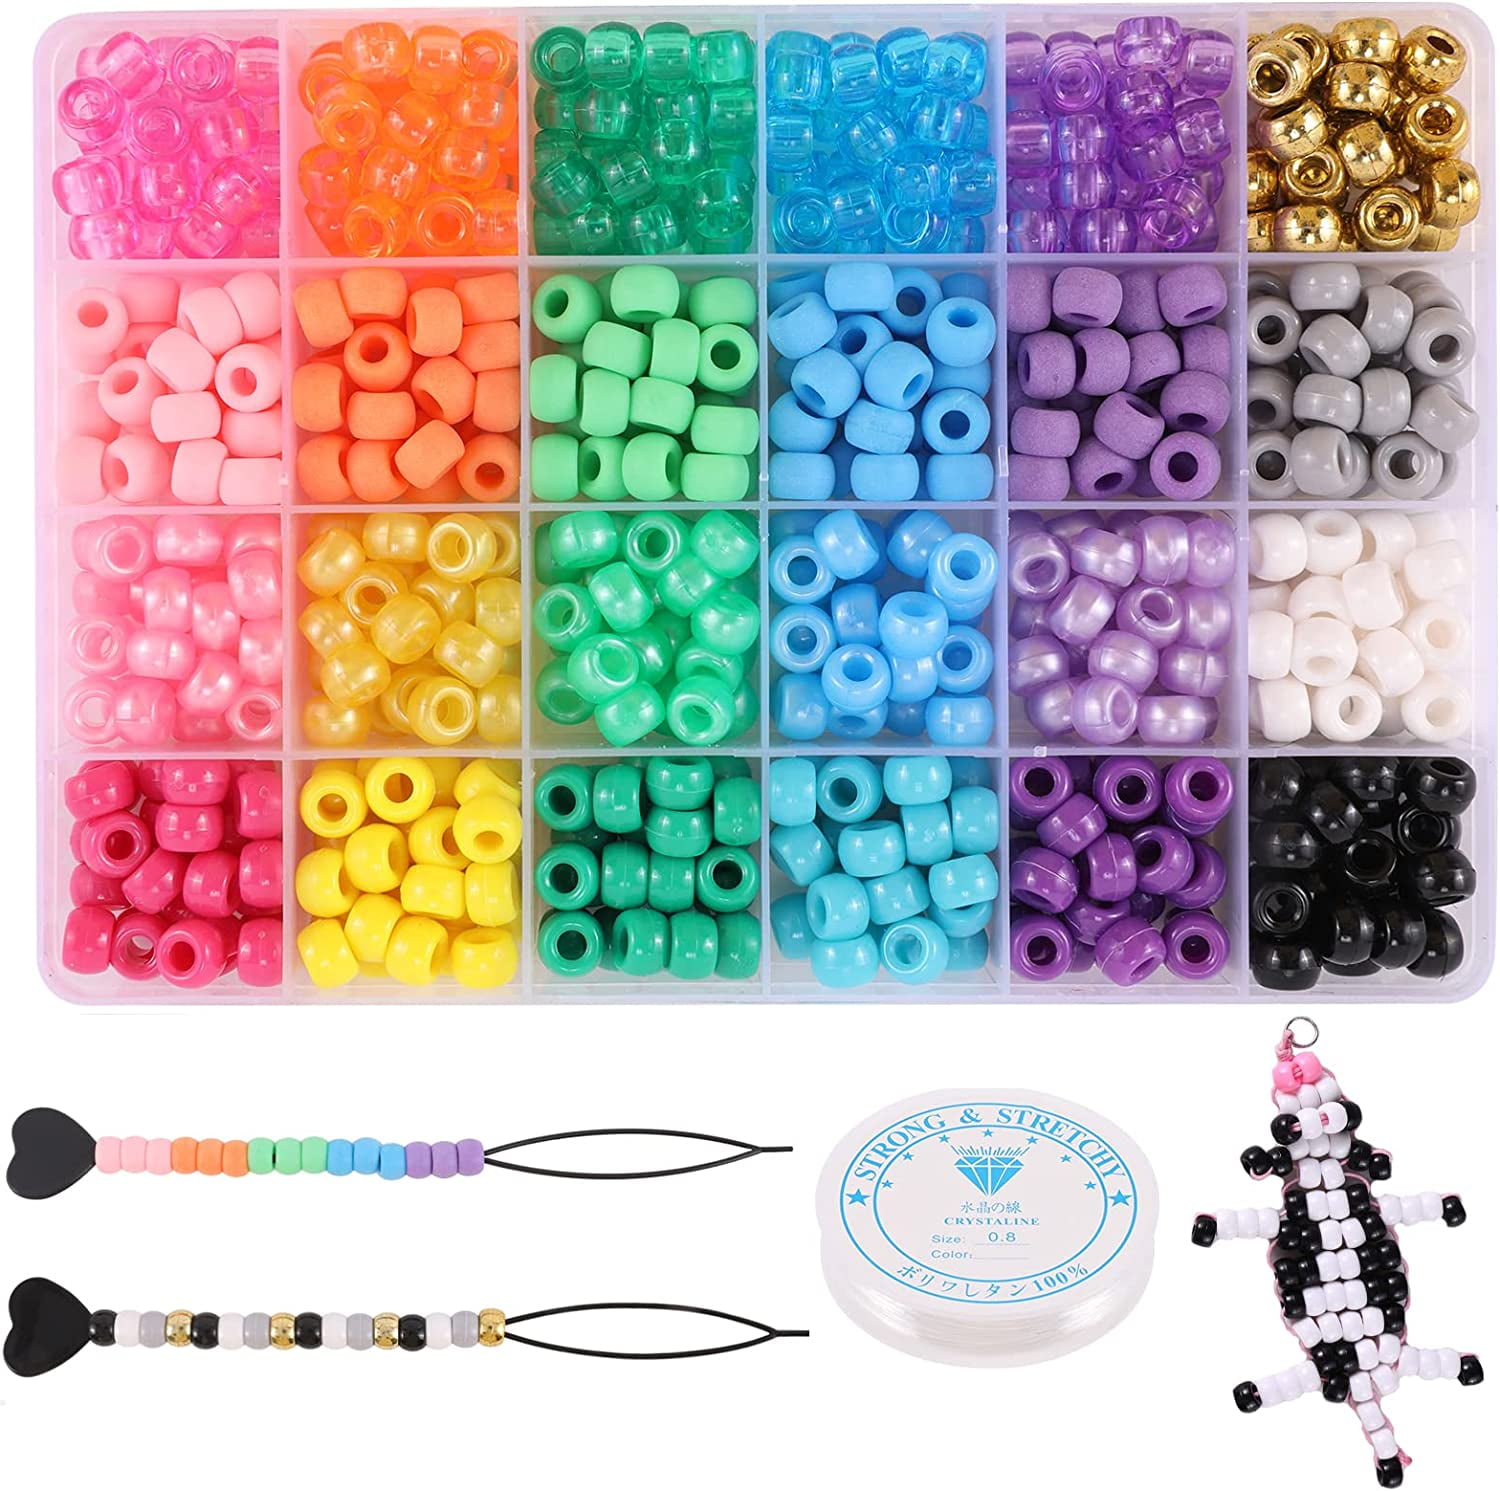 Pony Beads for Bracelets, Cridoz Bead Bracelet Making Kit Include 24 Colors  Pastel Pony Beads and Letter Beads Round for Bracelets Jewelry Making :  : Home